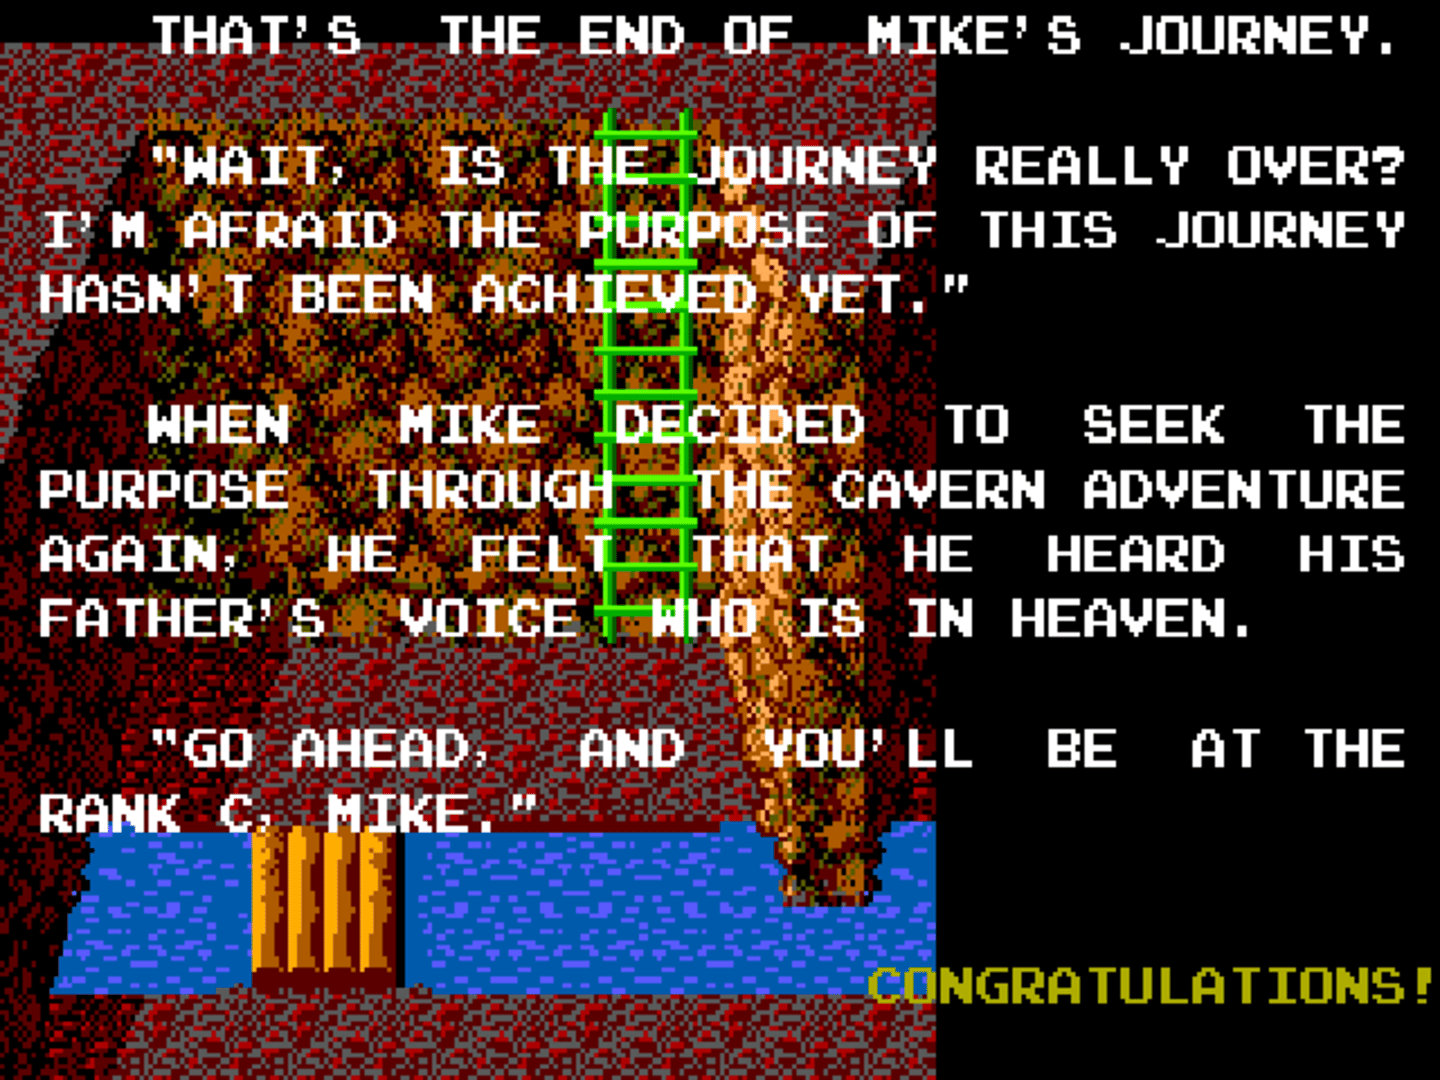 Mike's Lonely Journey screenshot